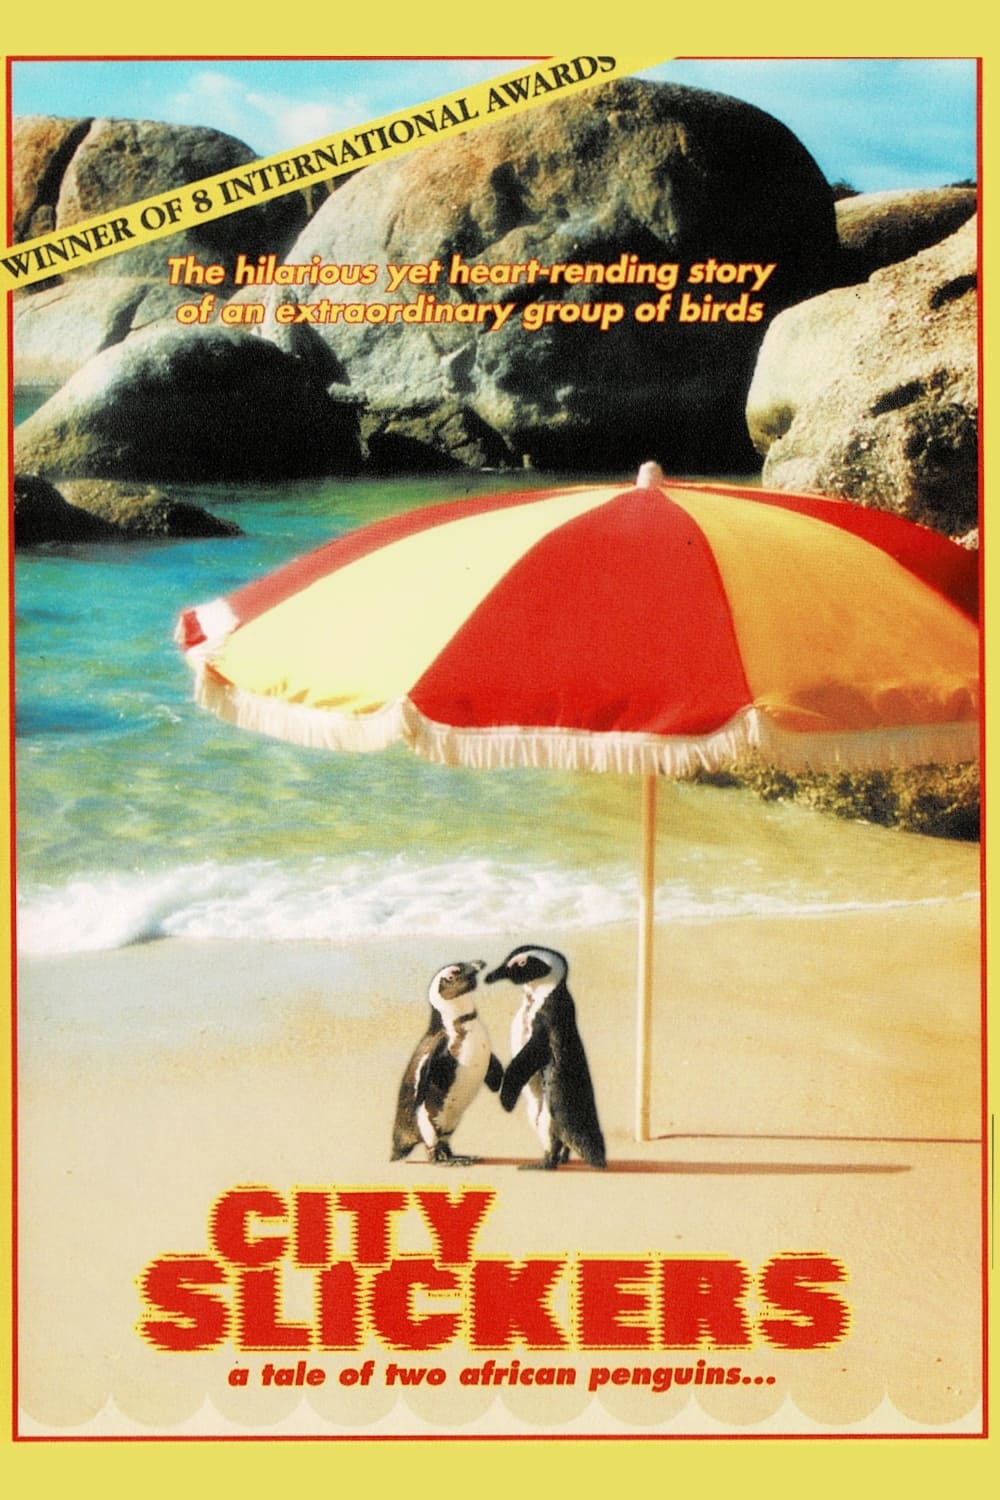 City Slickers: A tale of two African penguins